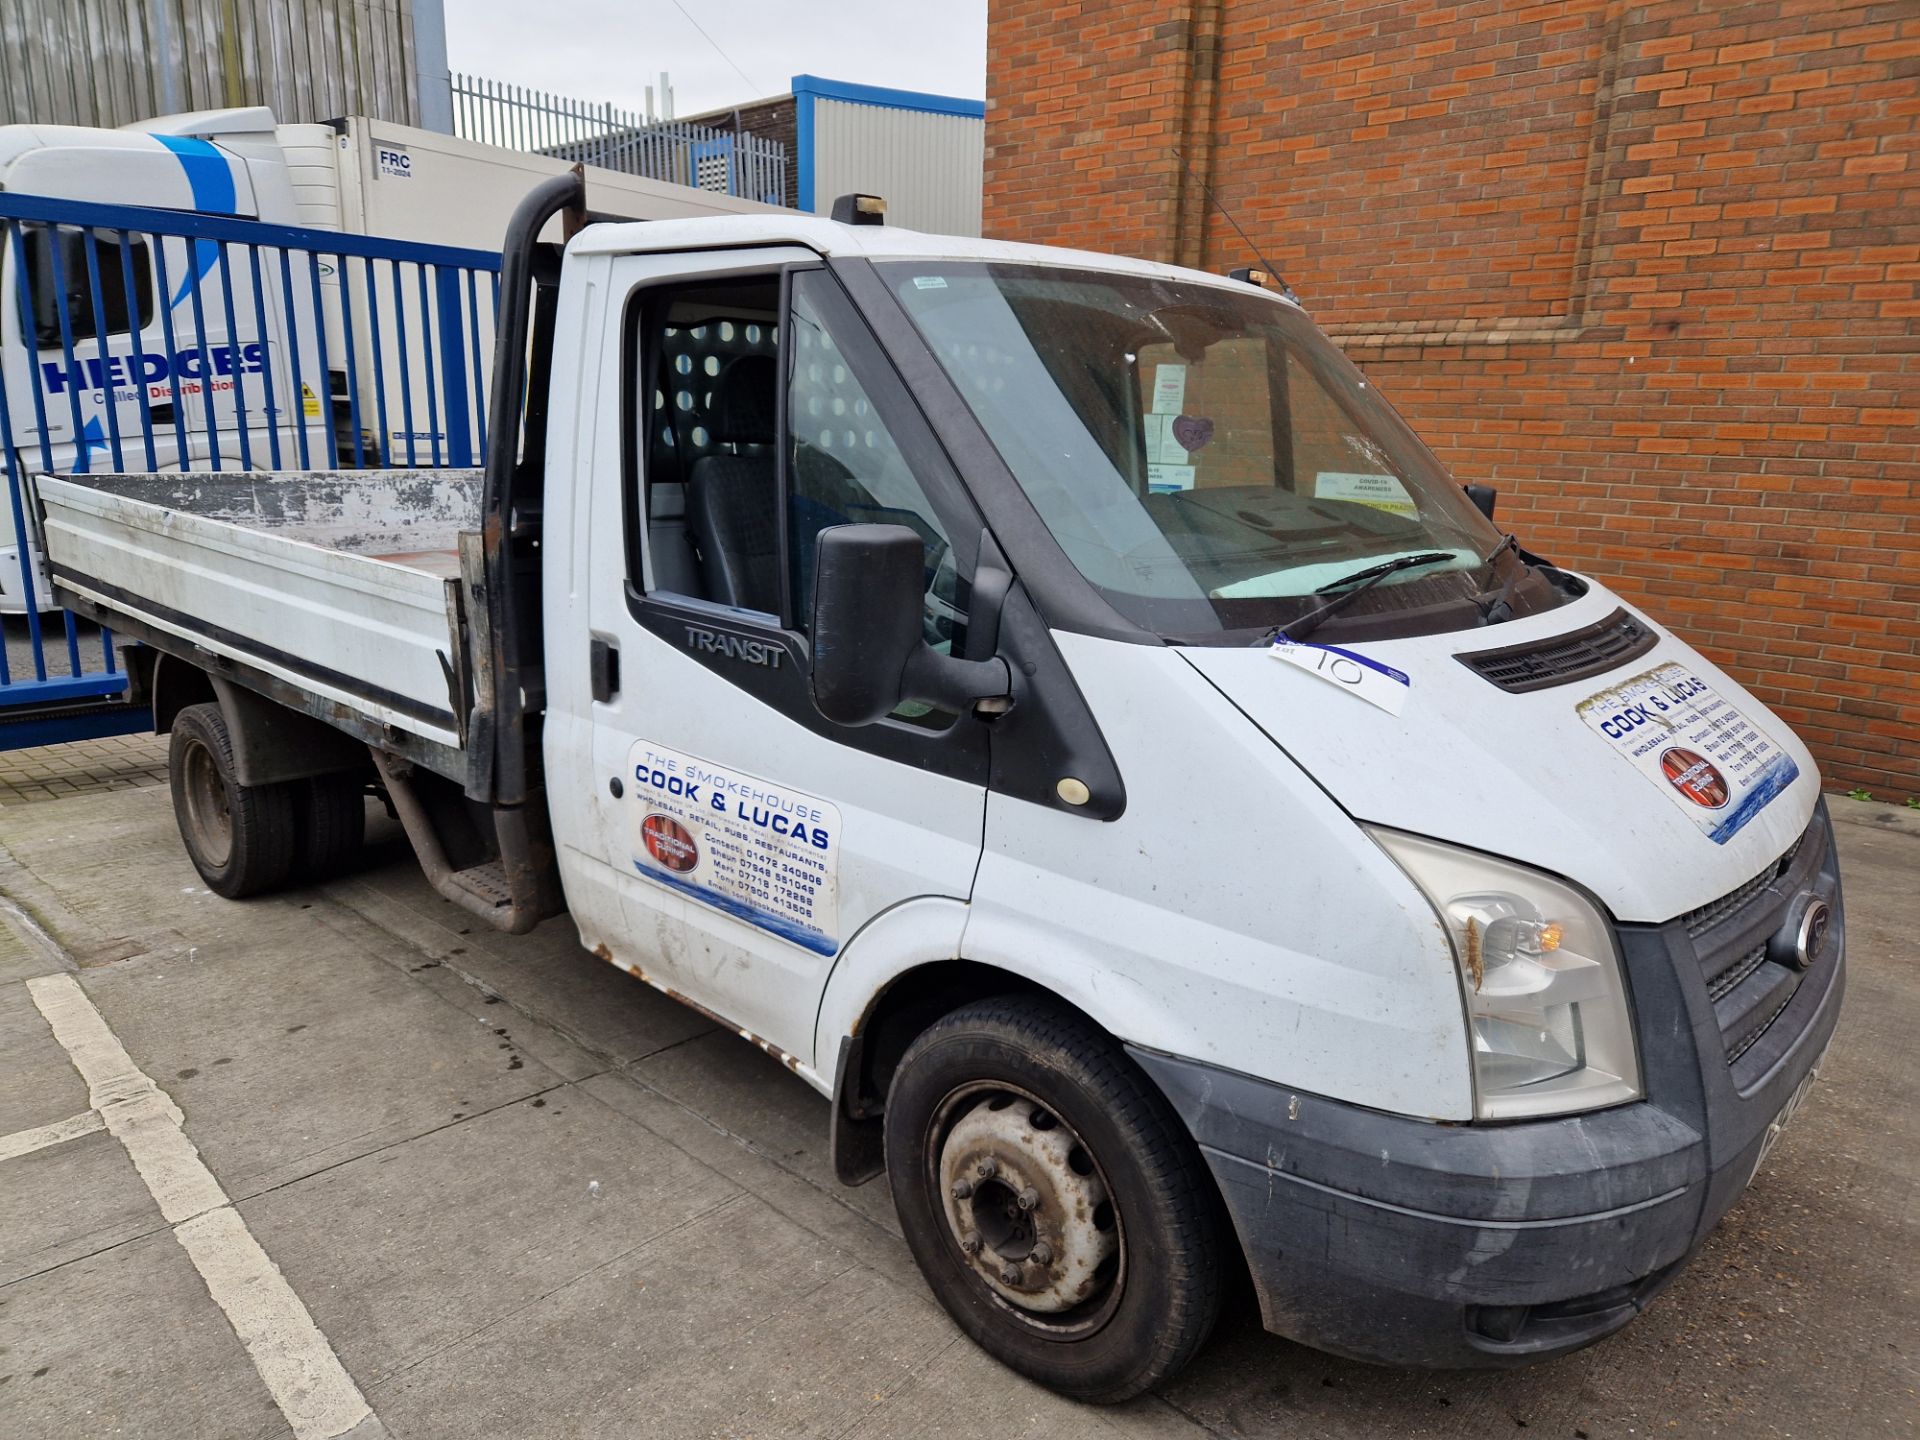 Ford Transit 100 350T Dropside Lorry, registration no. MJ12 DVG, date first registered 30/04/2012,